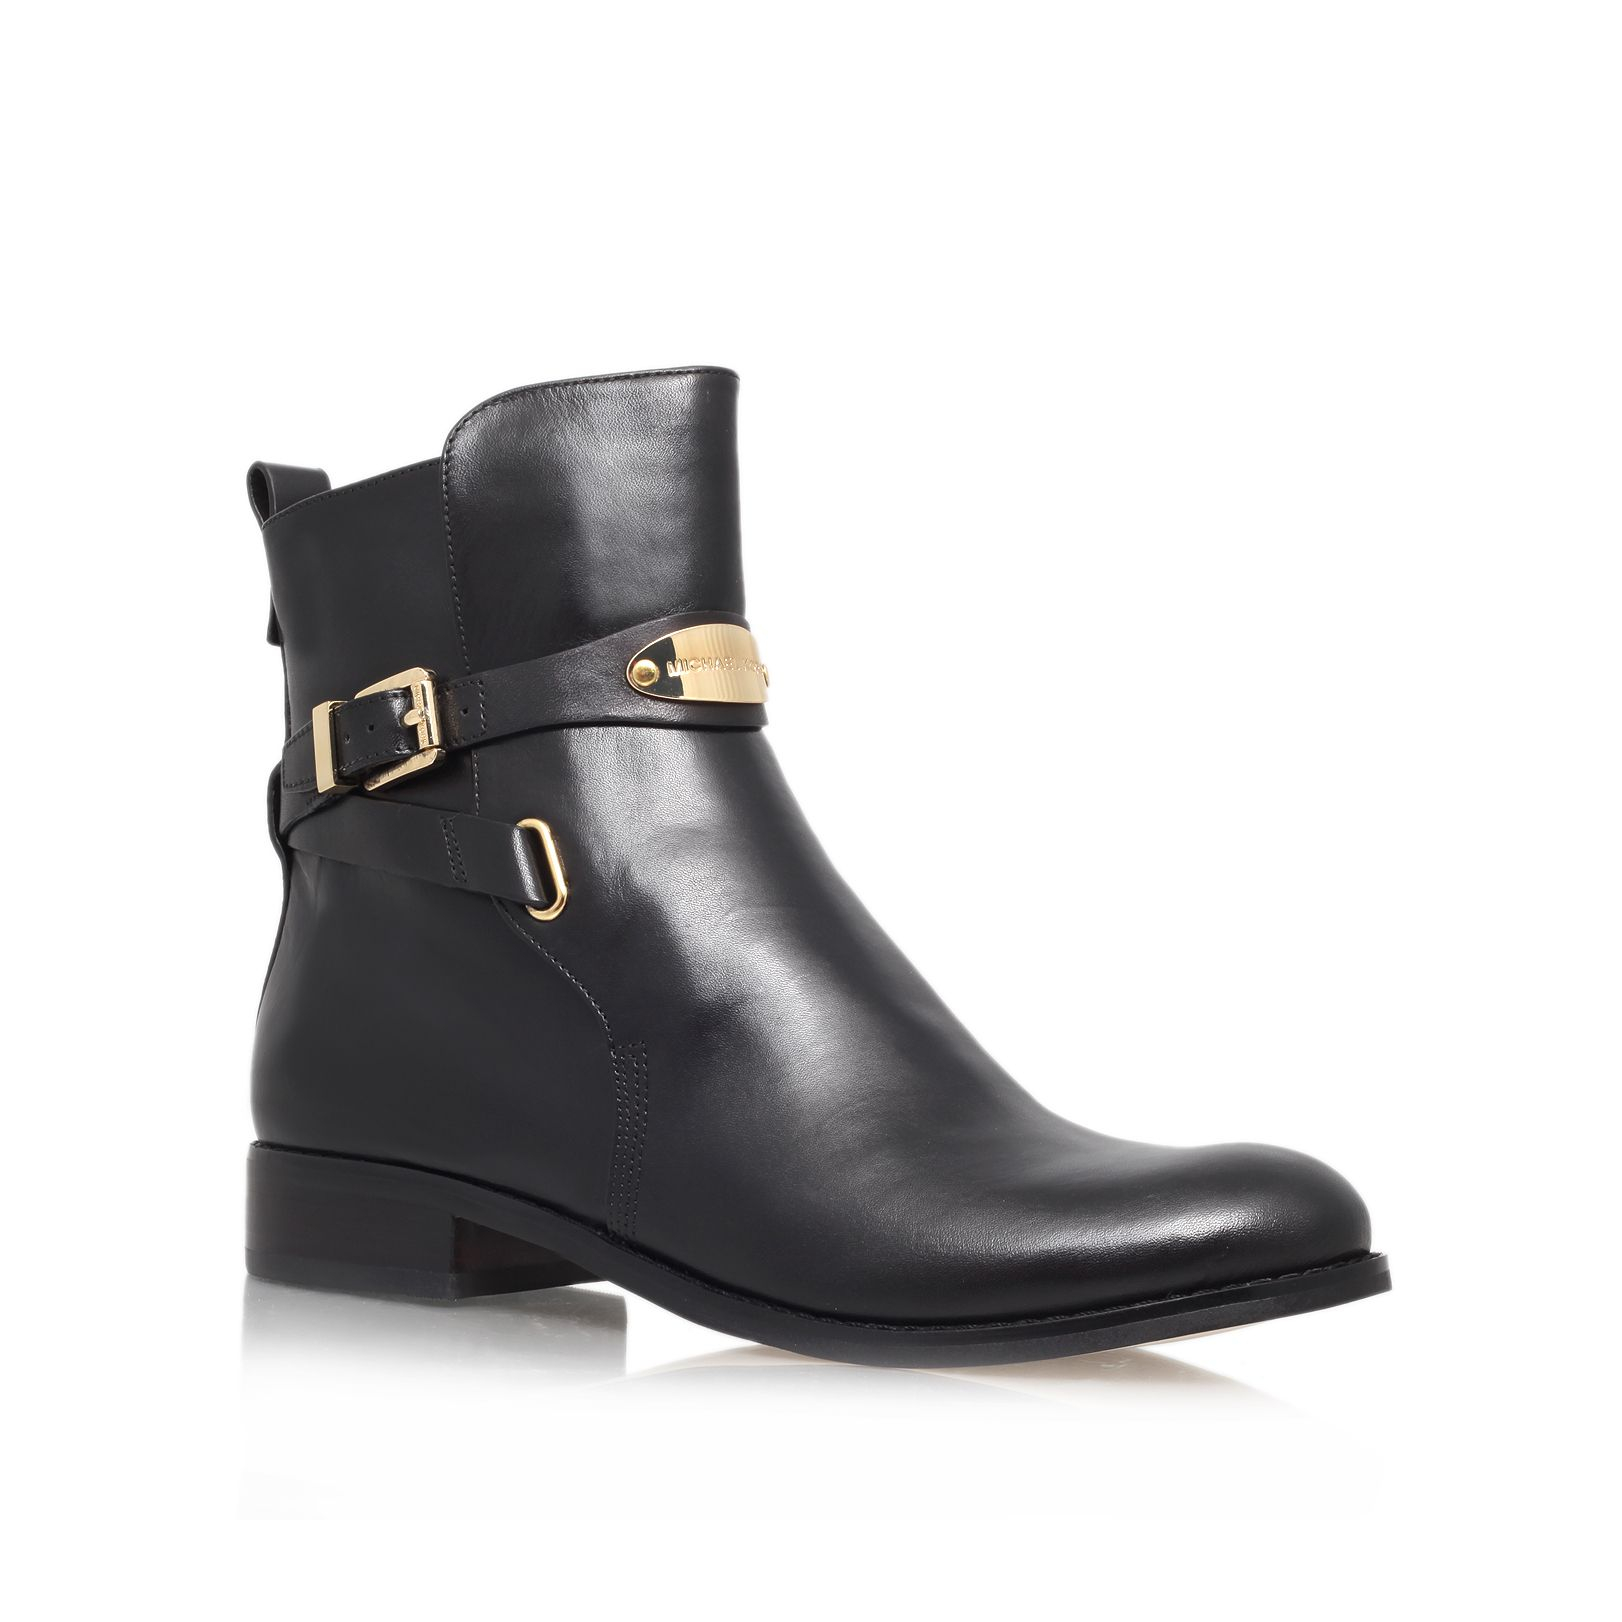 Michael Kors Arley Leather Ankle Boots in Black